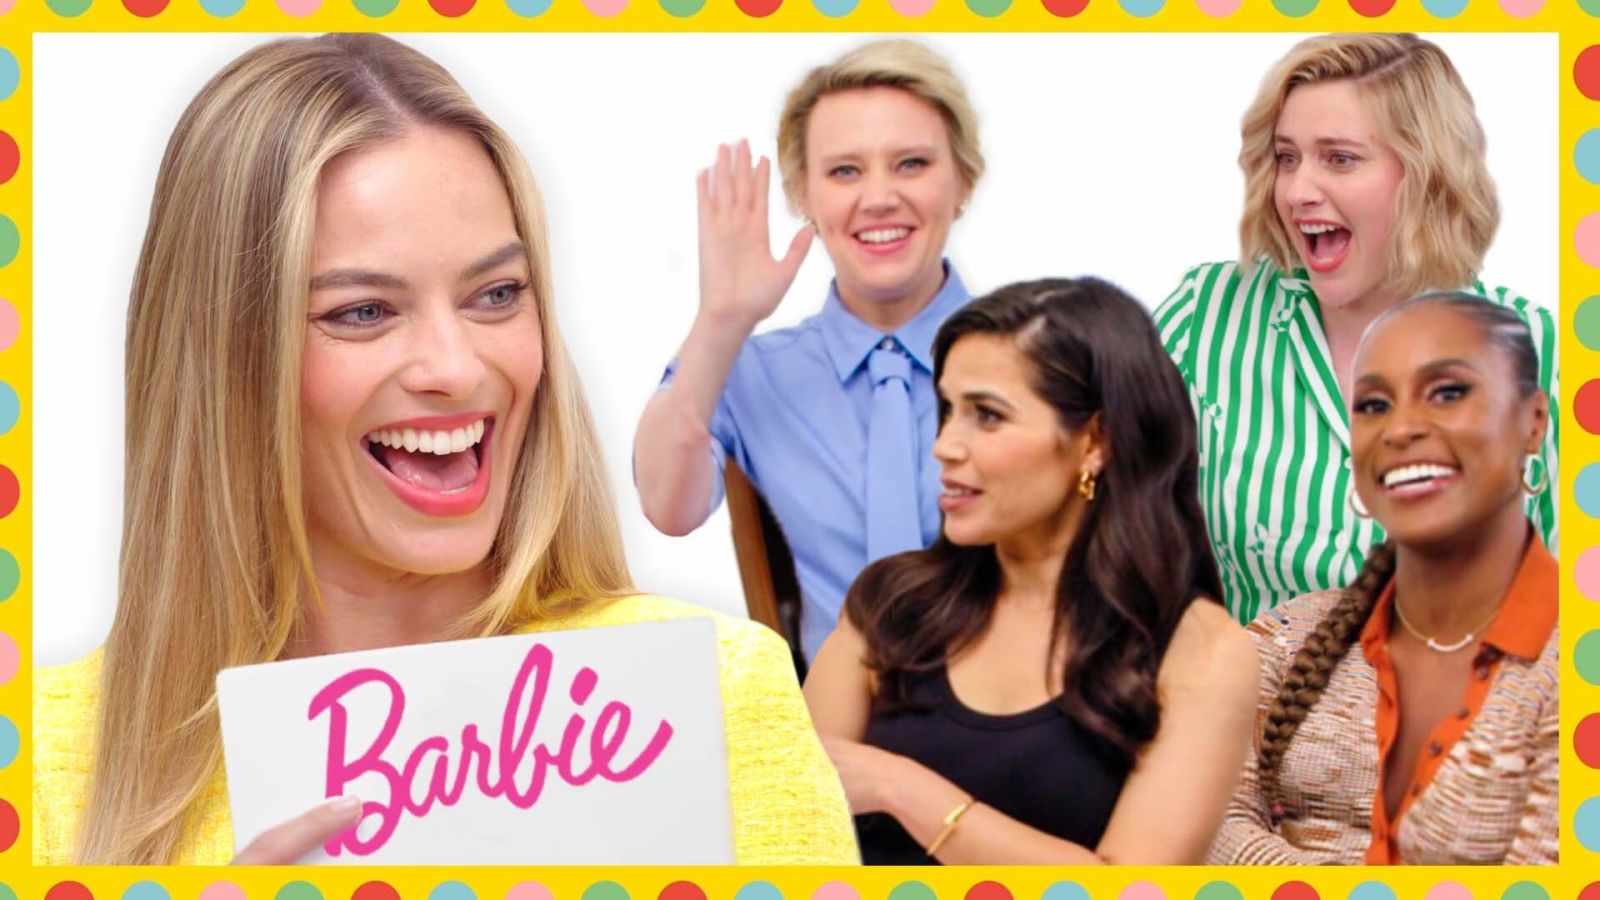 'Barbie' Cast Test How Well They Know Each Other